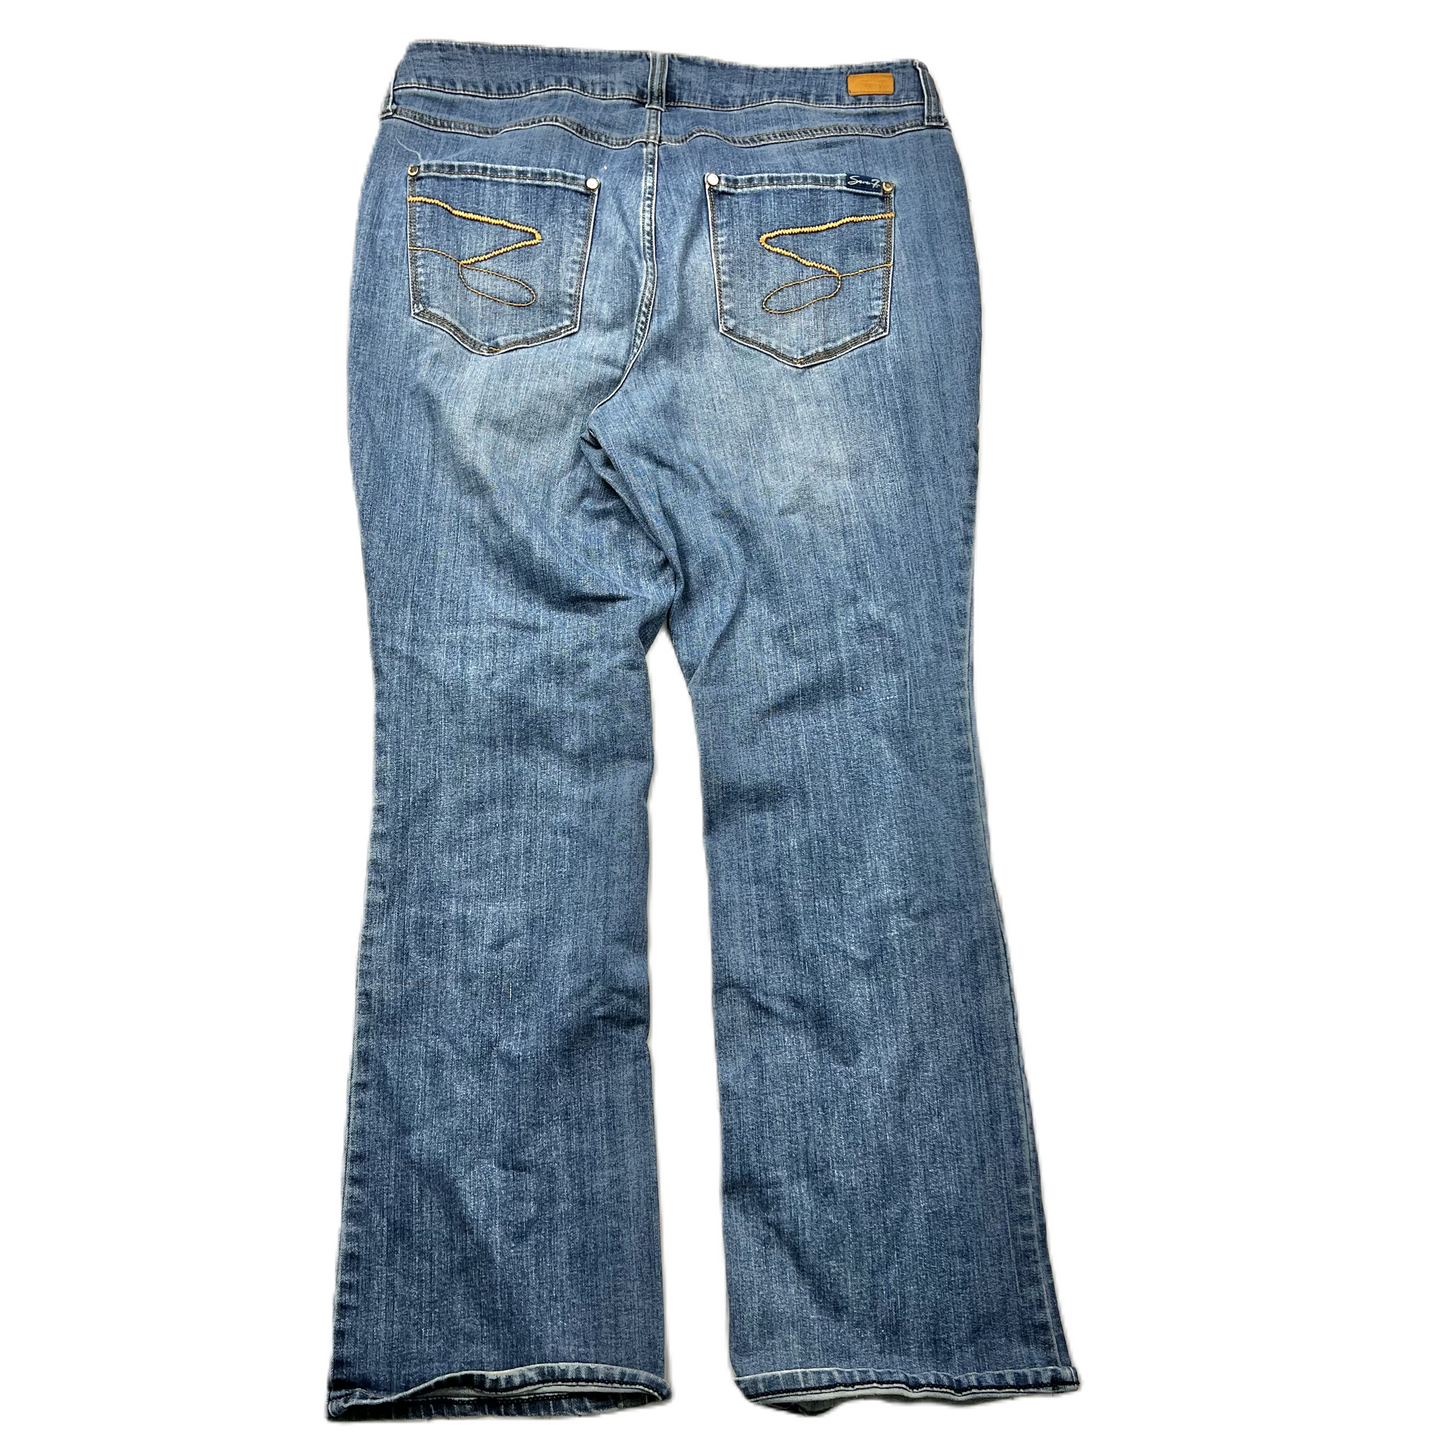 Blue Denim Jeans Straight By Seven 7, Size: 16w